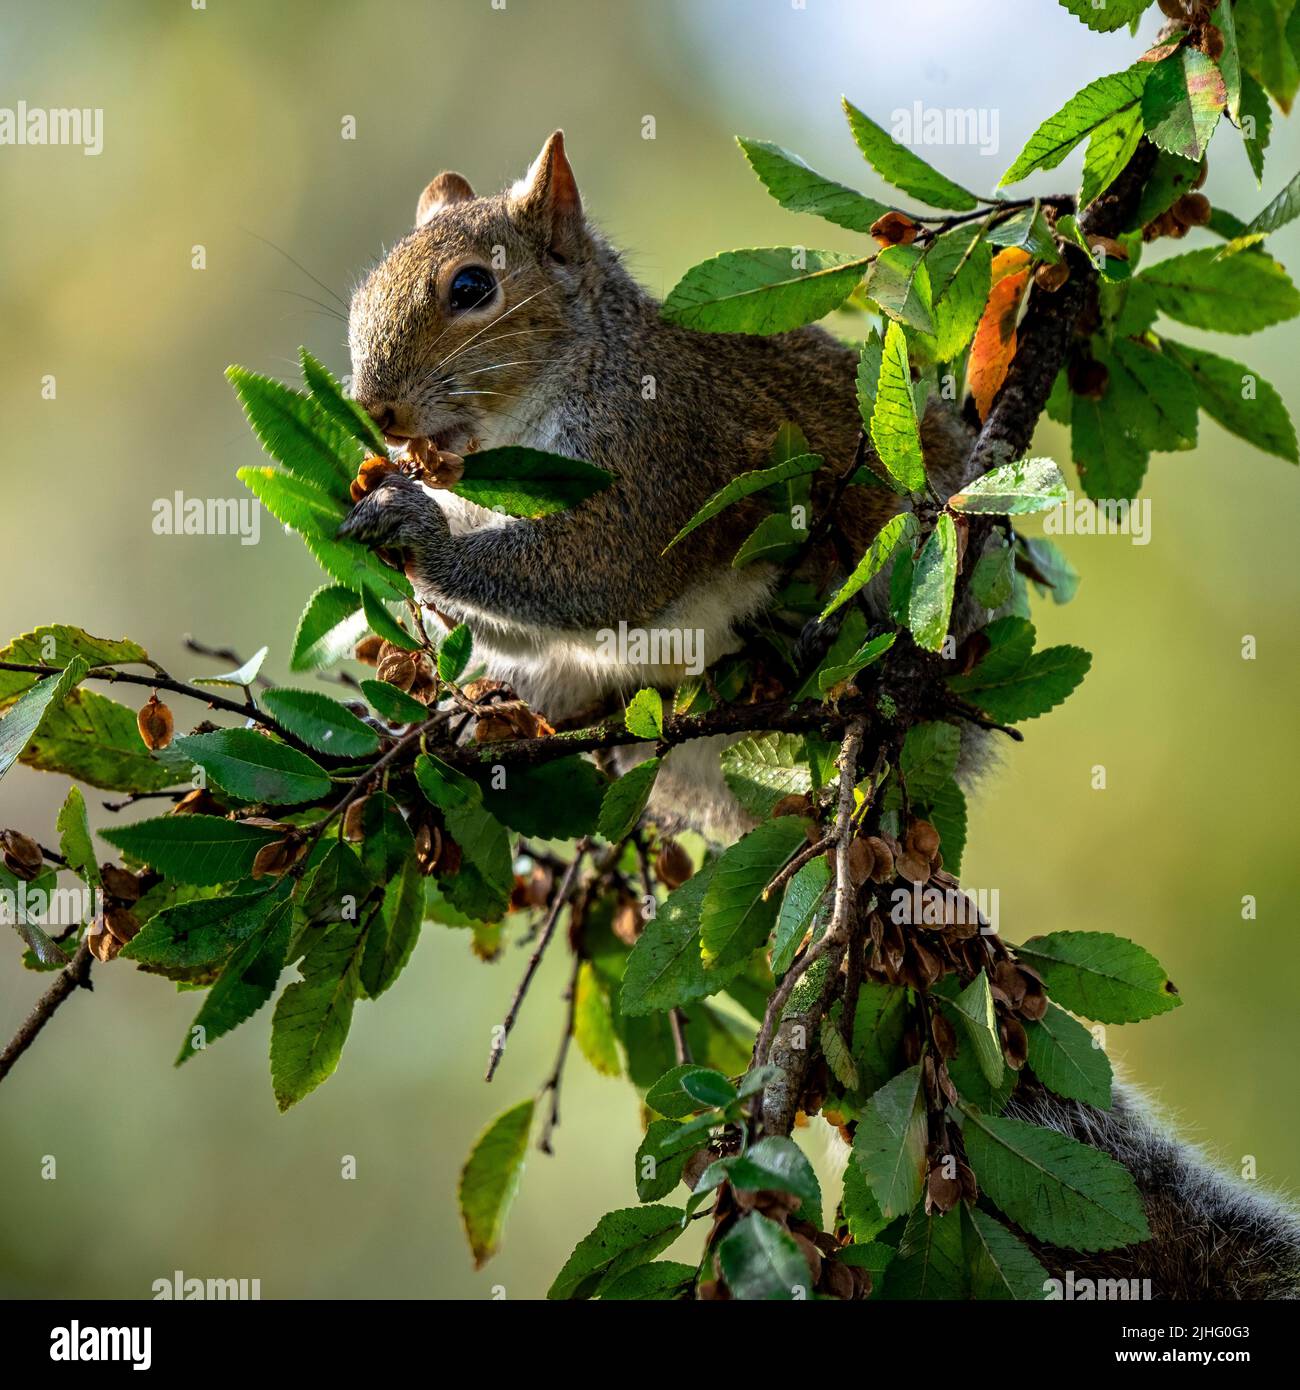 Squirrel in a tree feeding on tree leaves and blooms Stock Photo